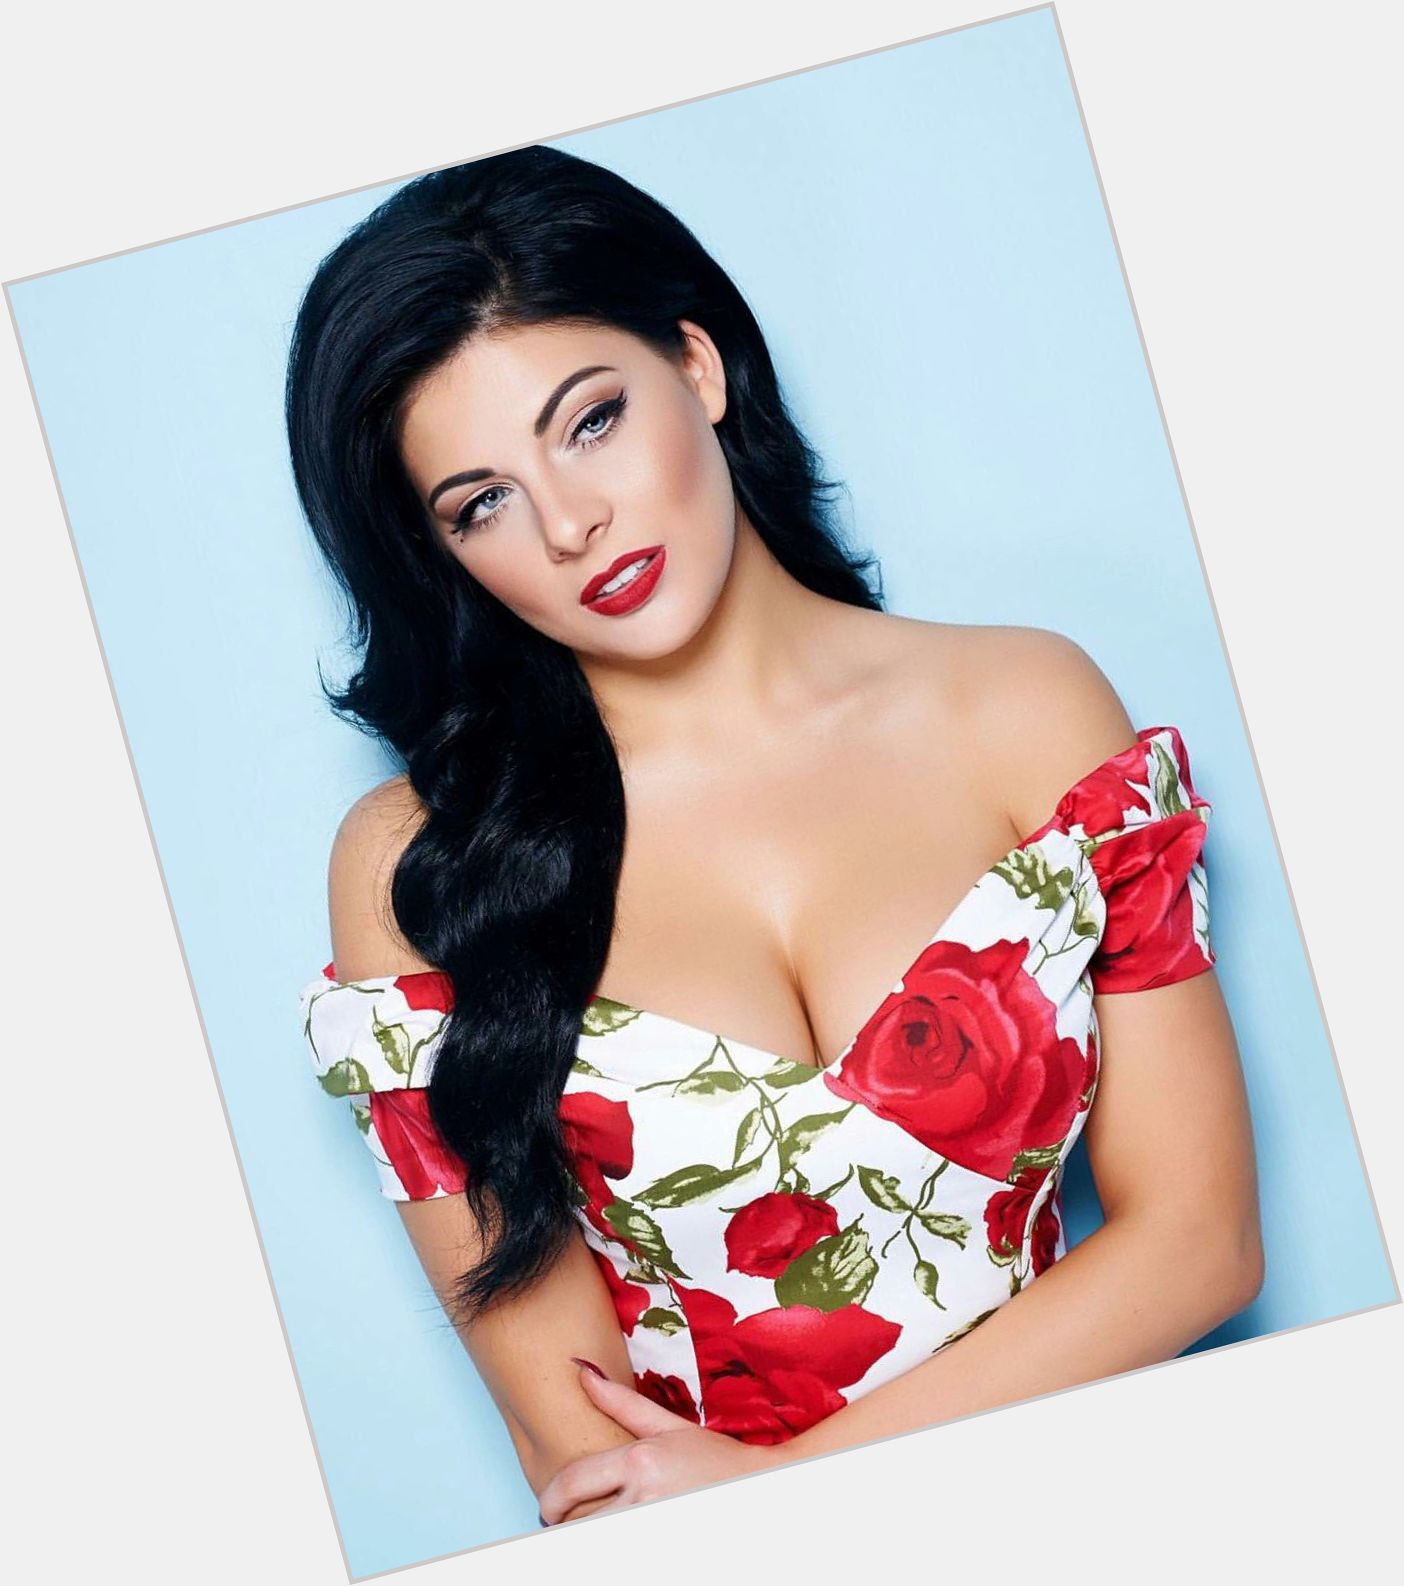 Lucy Kay dating 2